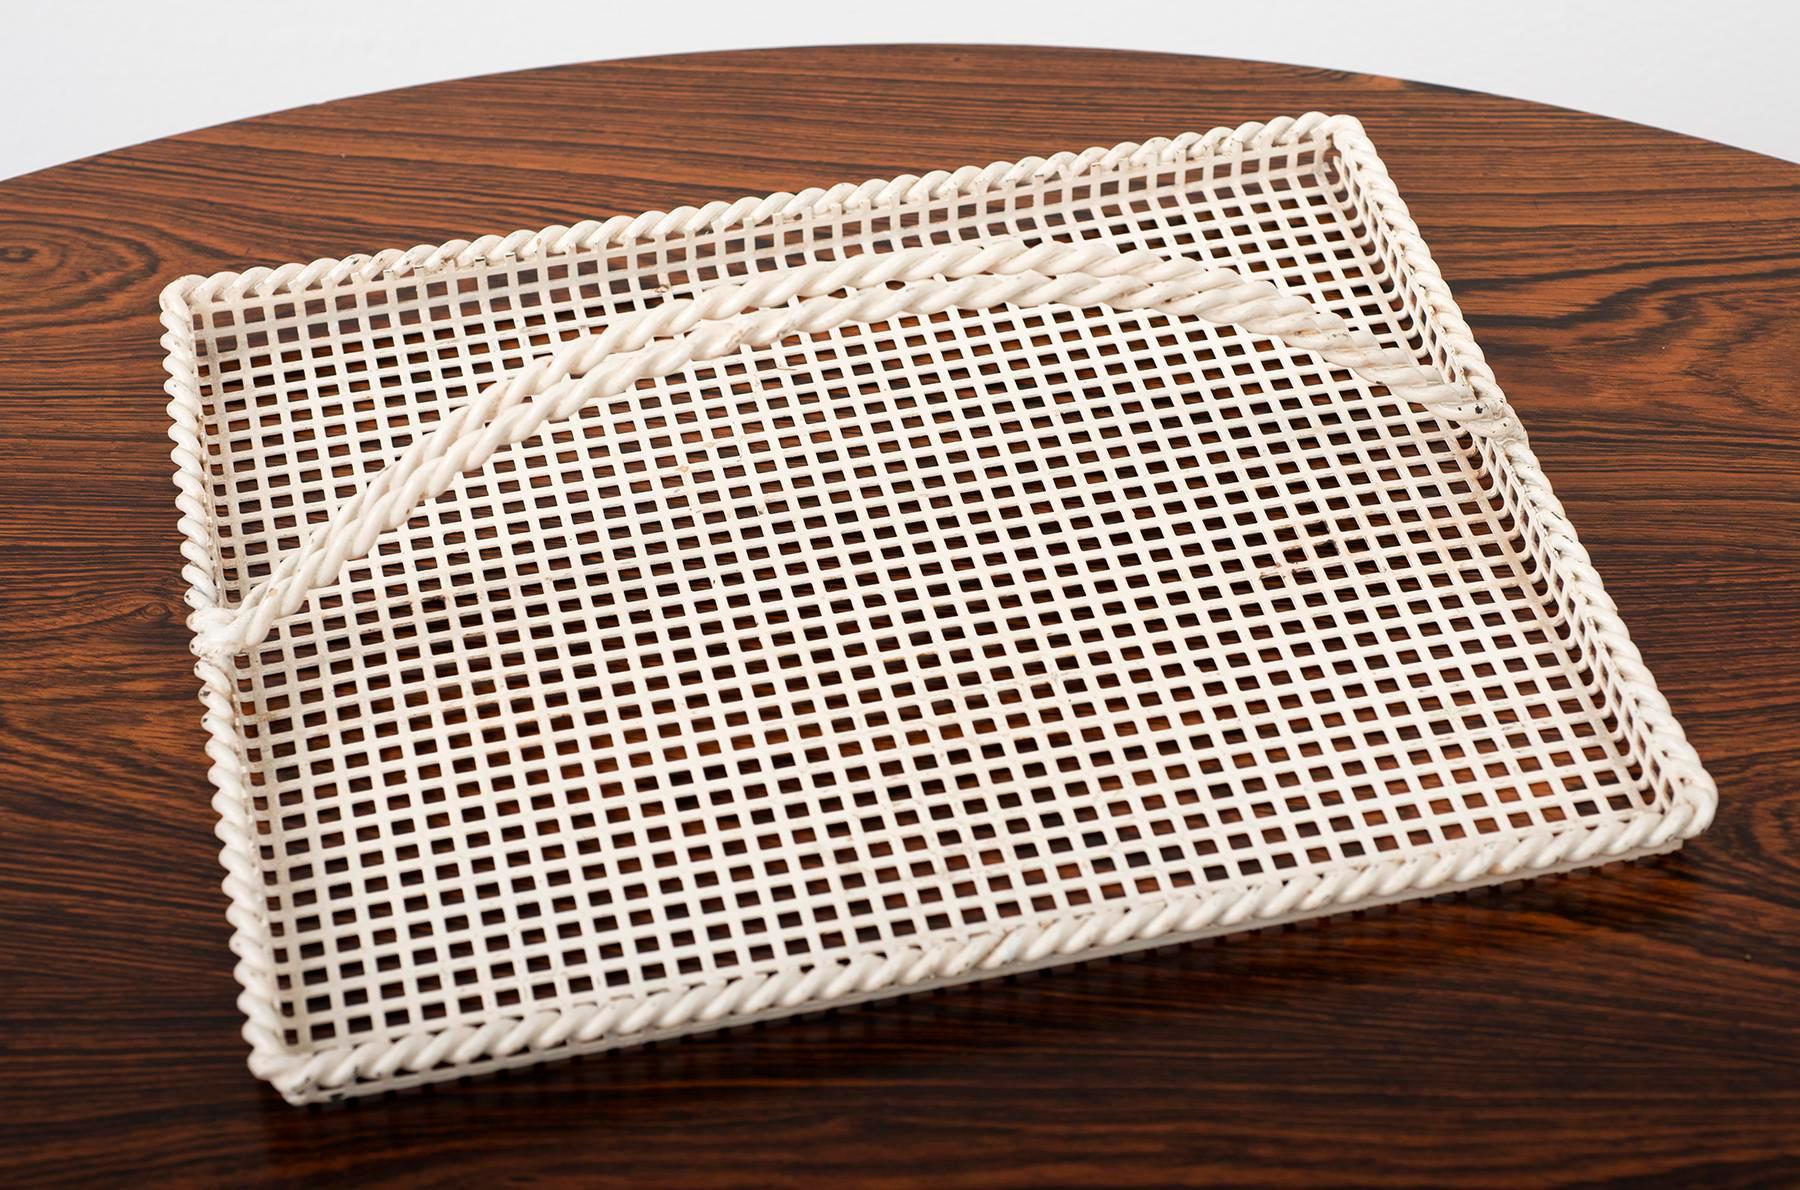 Mid-Century Modern Mathieu Matégot Serving Tray in Enameled Perforated Metal, France, 1950s